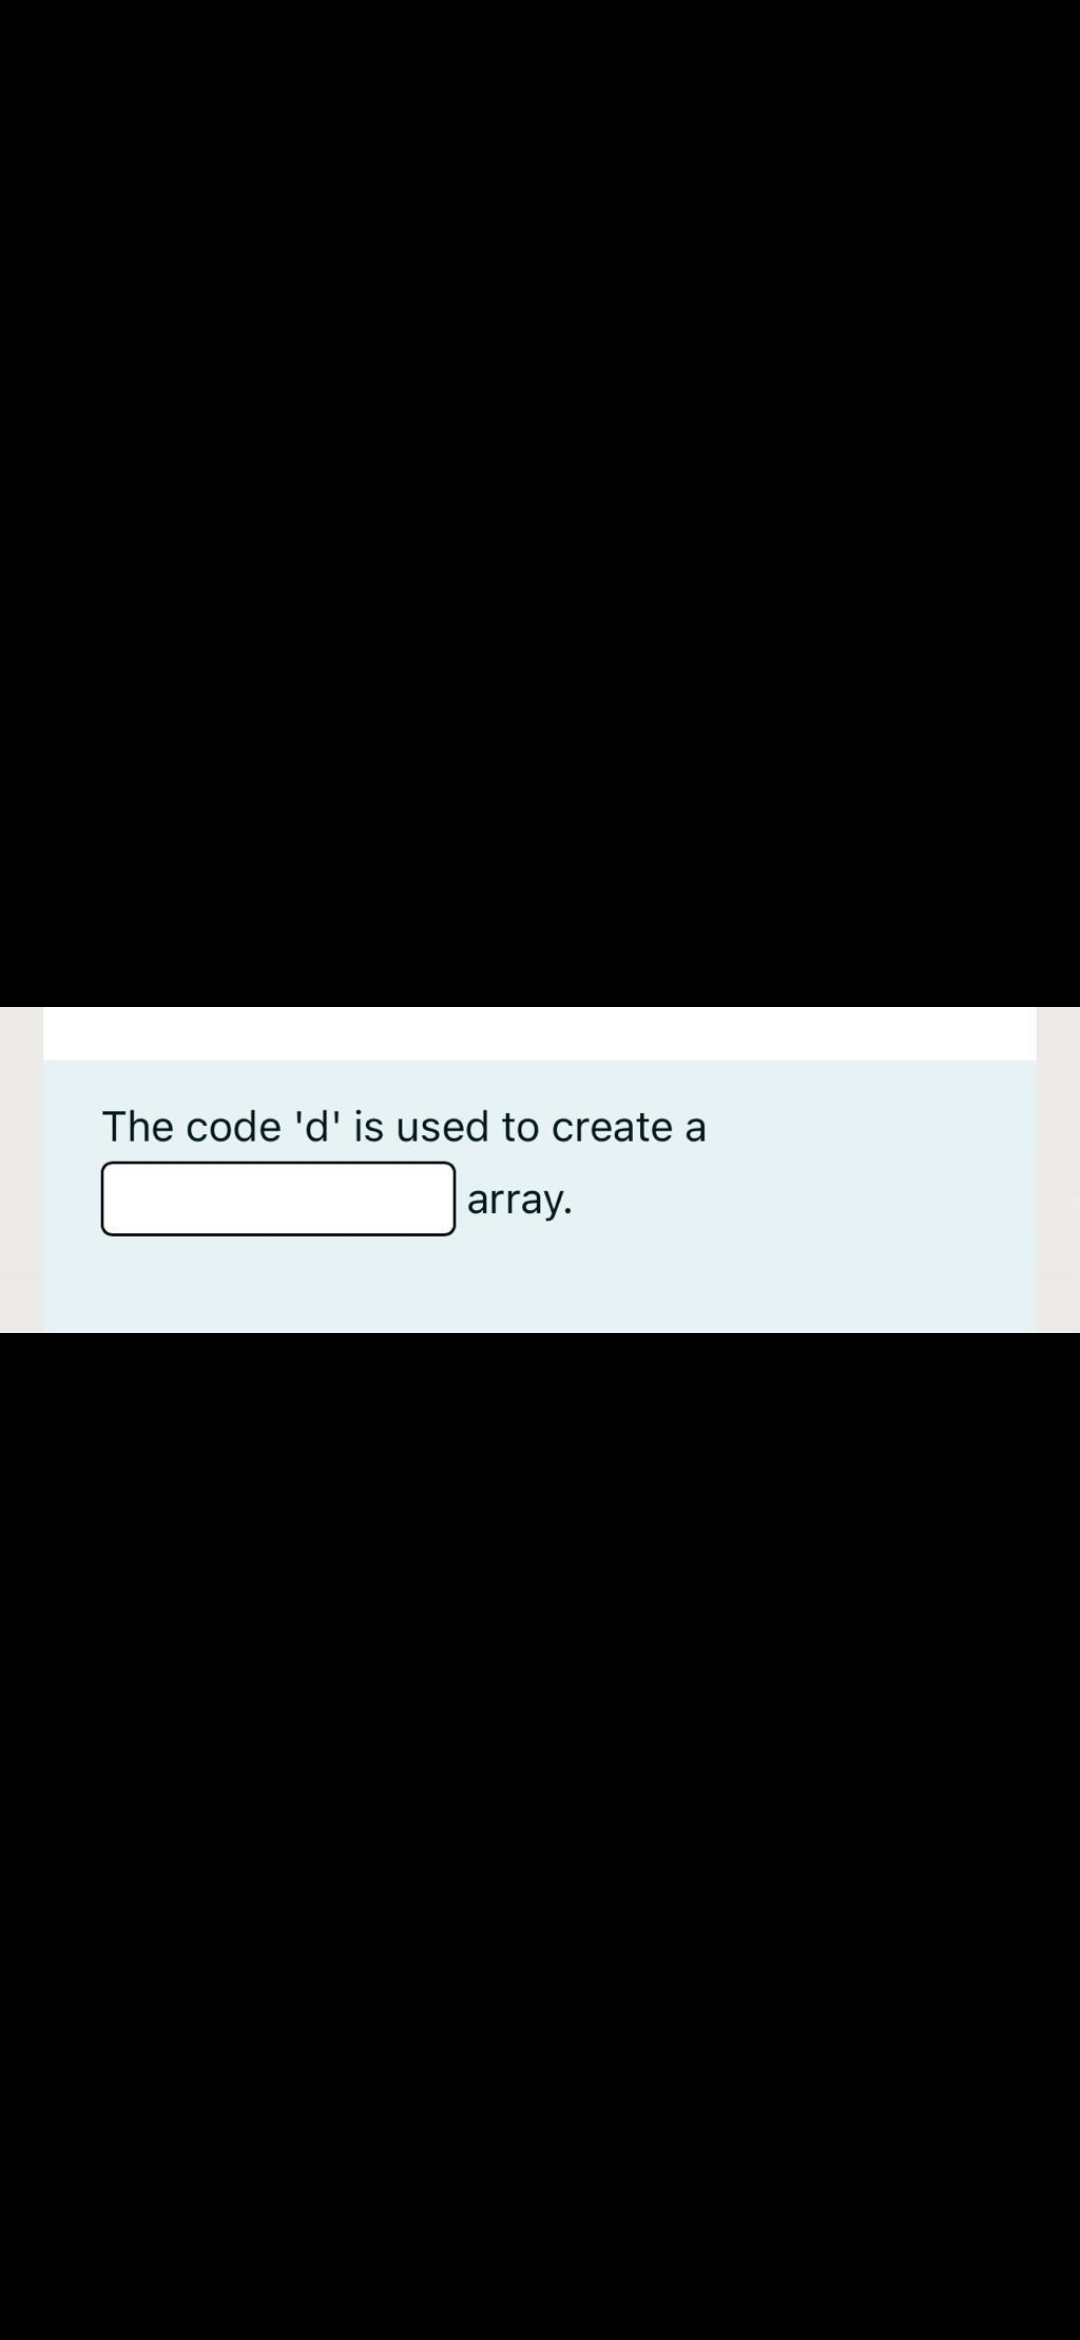 The code 'd' is used to create a
array.
